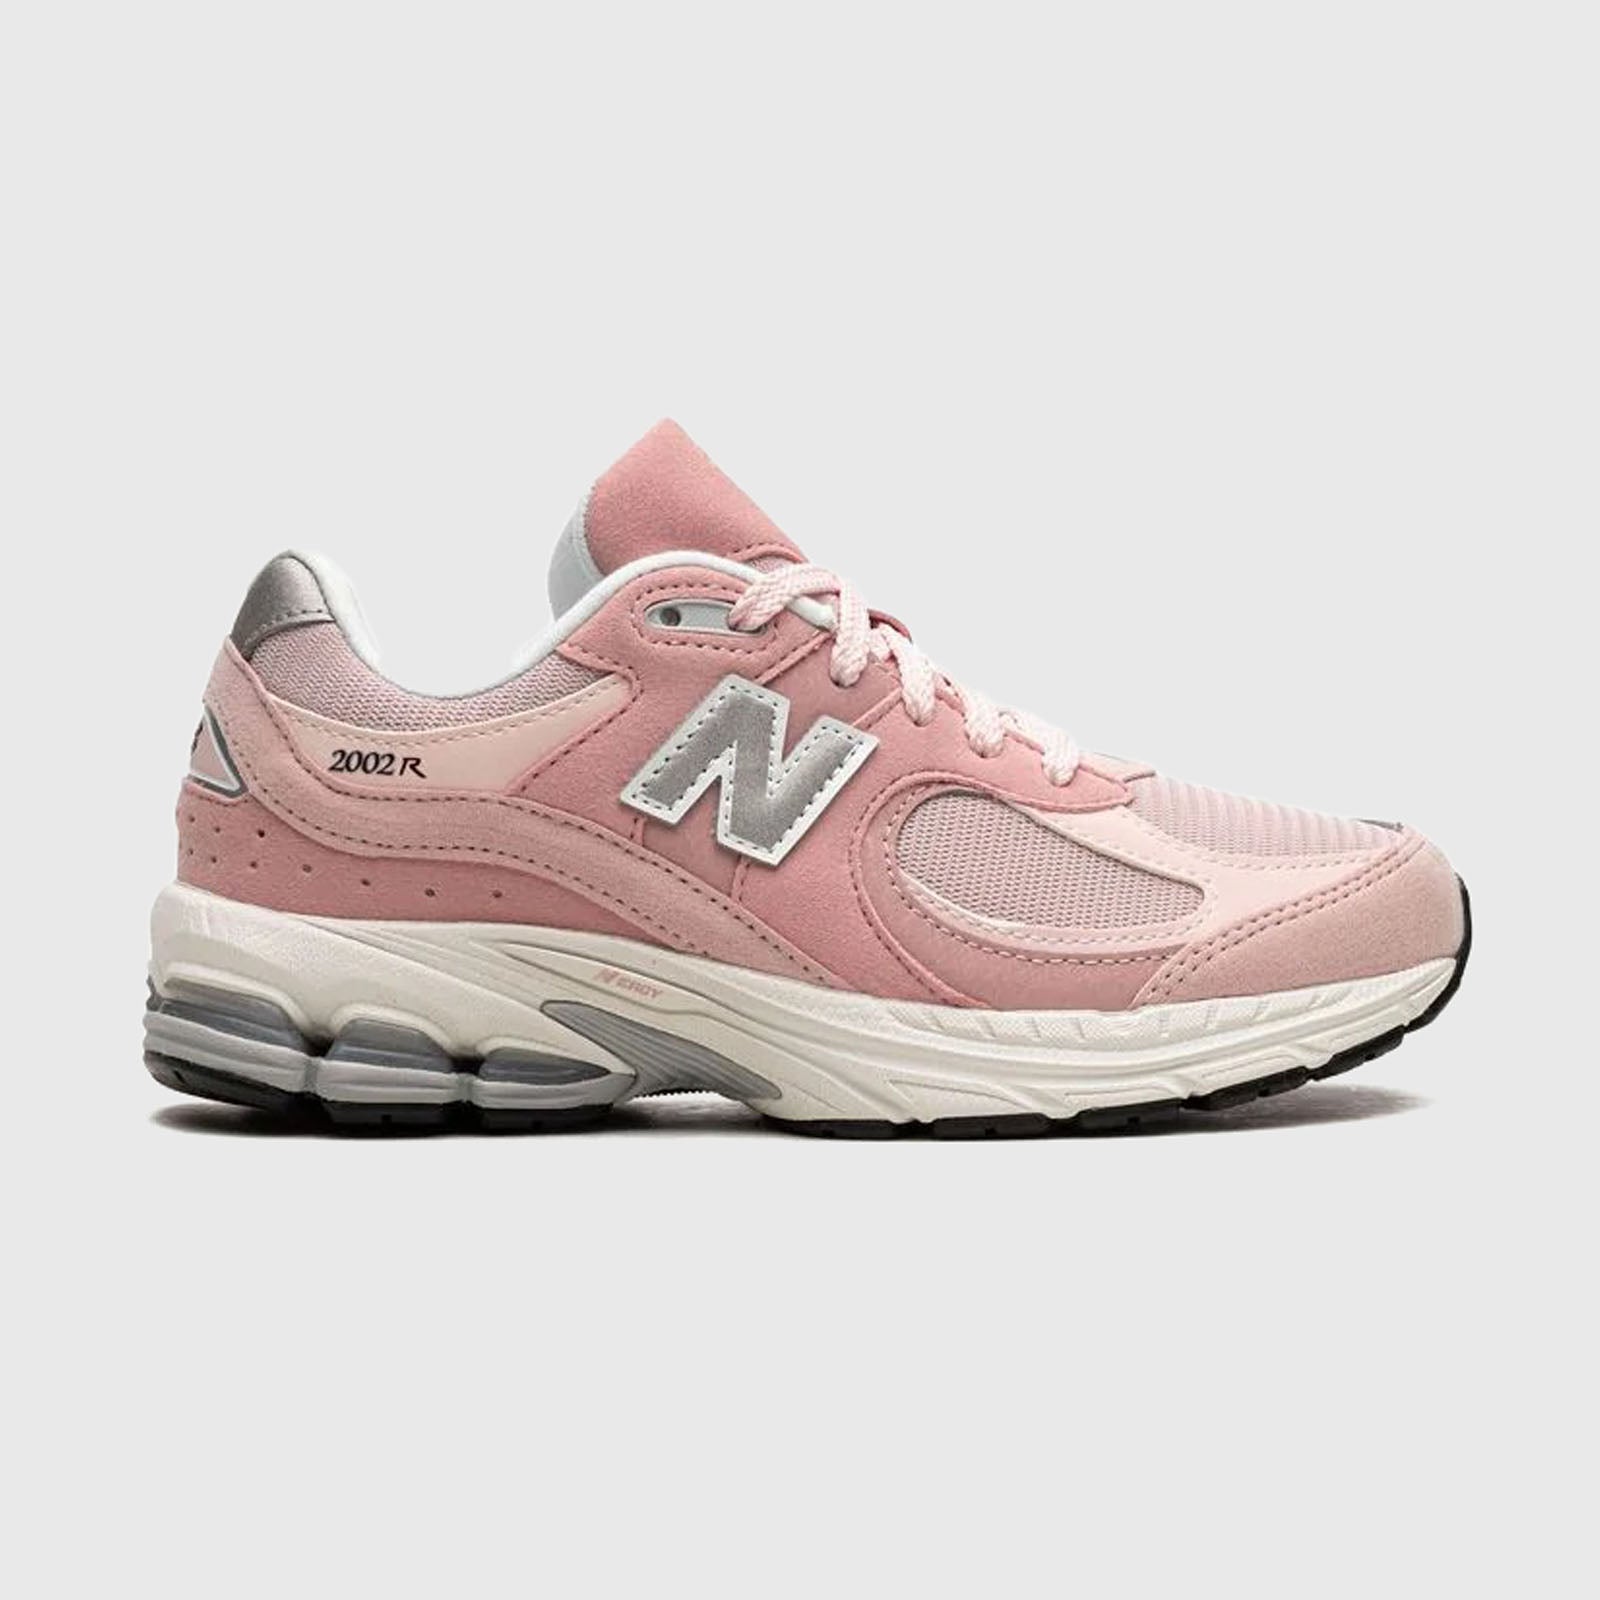 New Balance 2002R Synthetic Pink Sneakers - 5